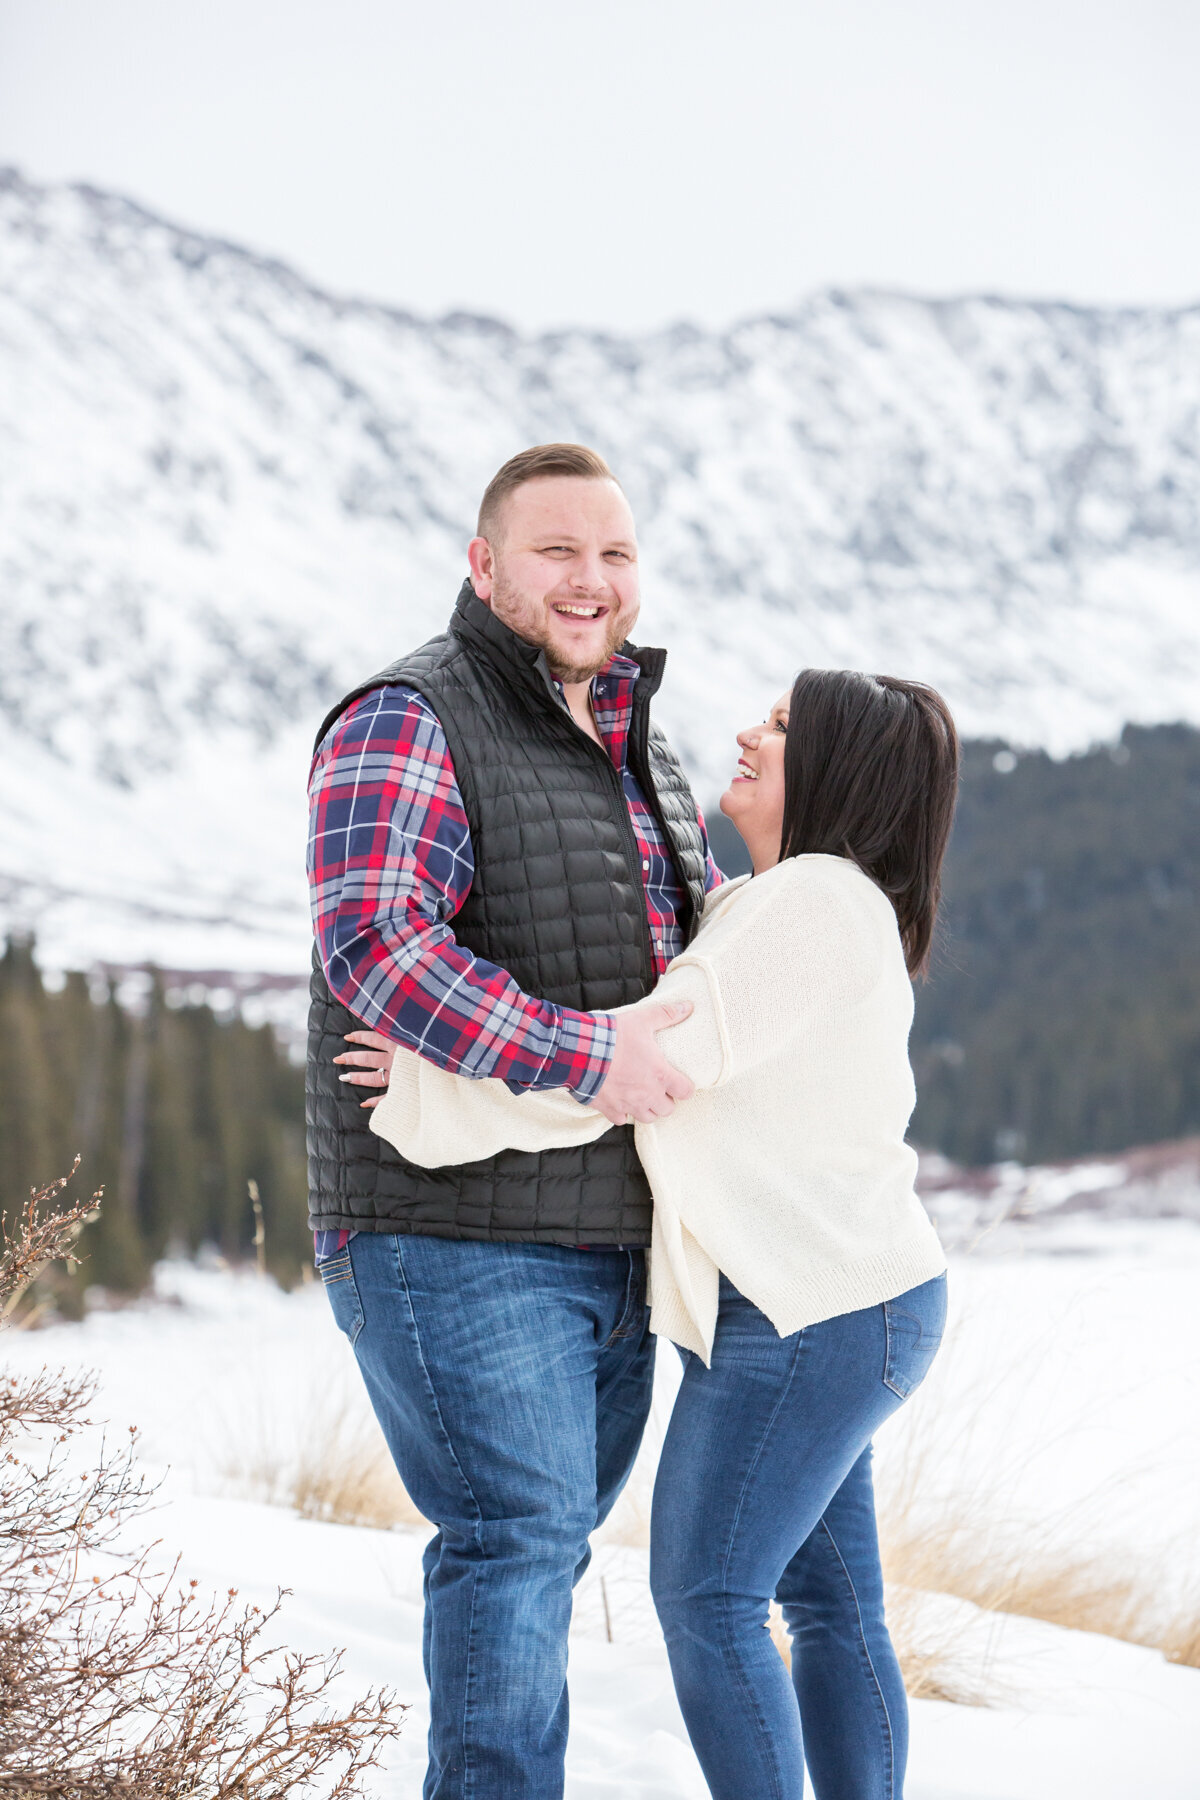 Engagement photographer in Colorado during the winter